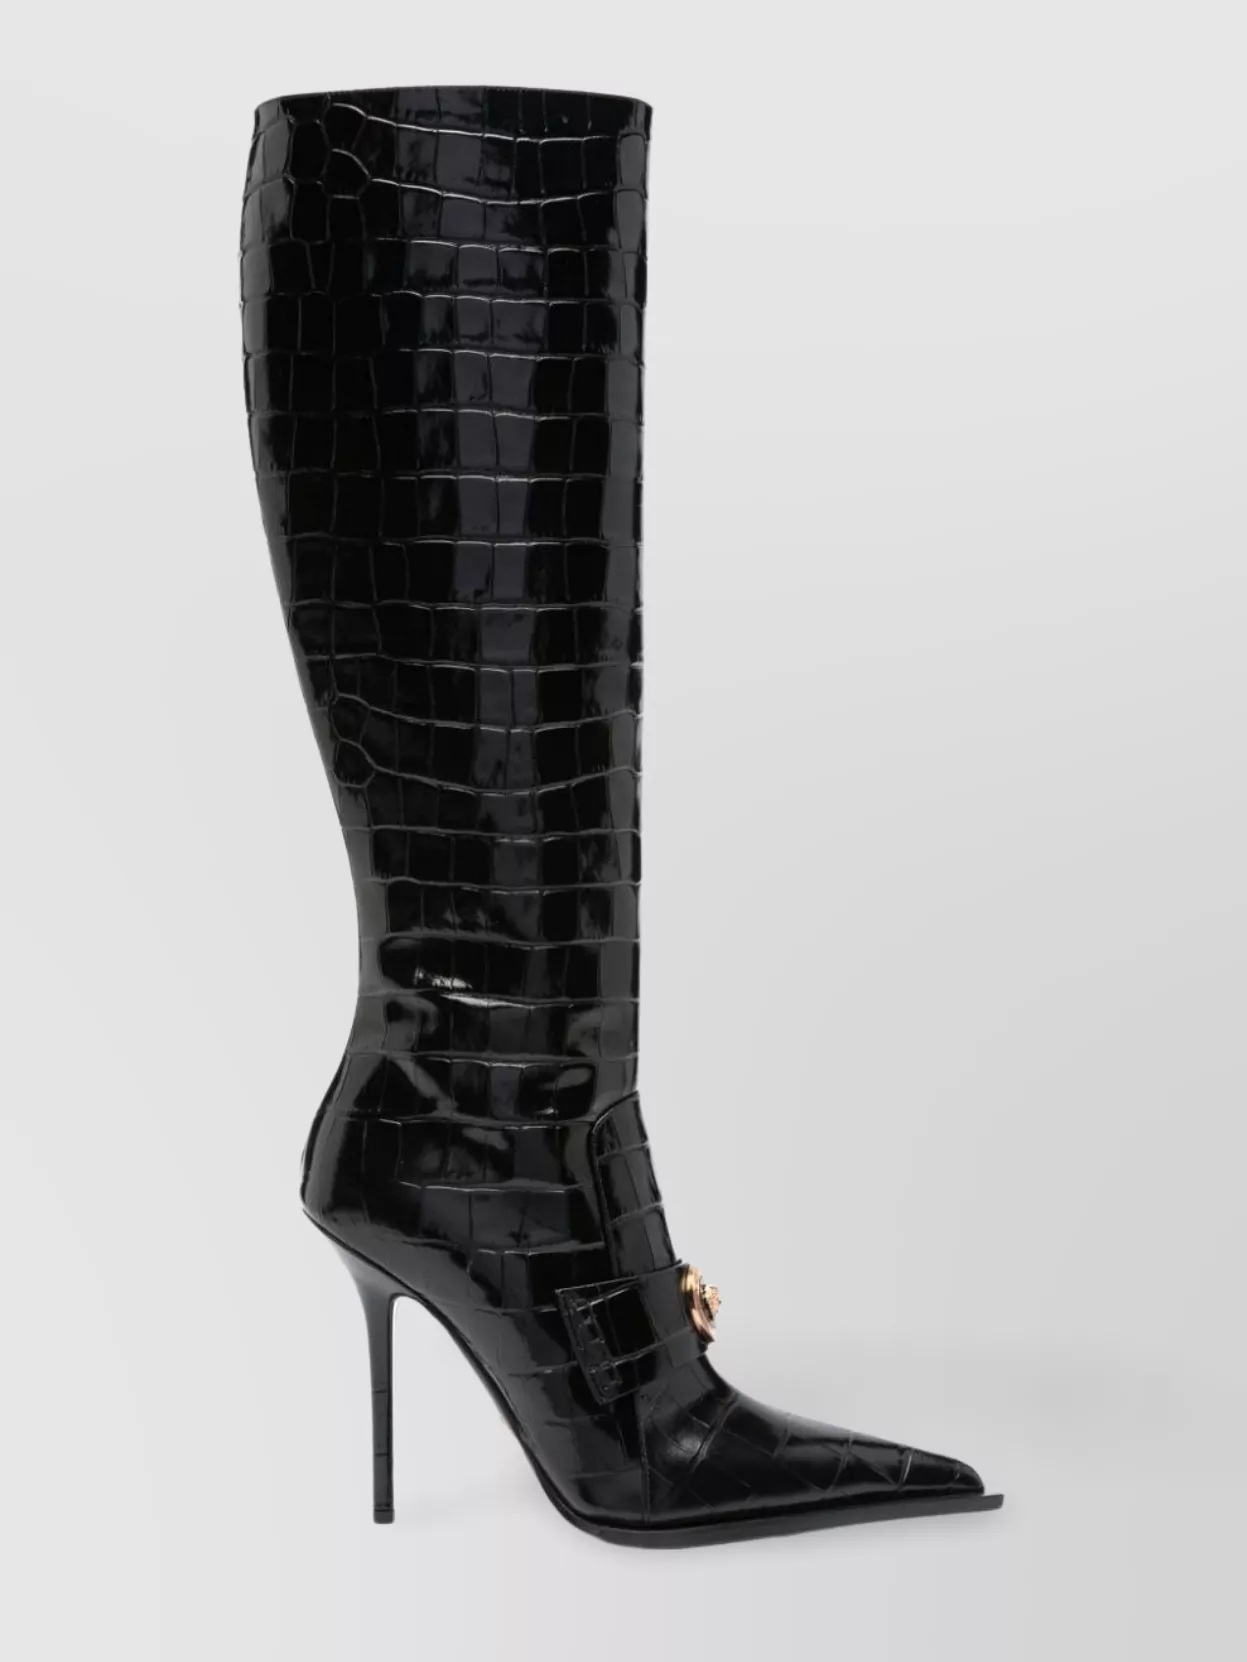 VERSACE CROCODILE EMBOSSED STILETTO ANKLE BOOTS